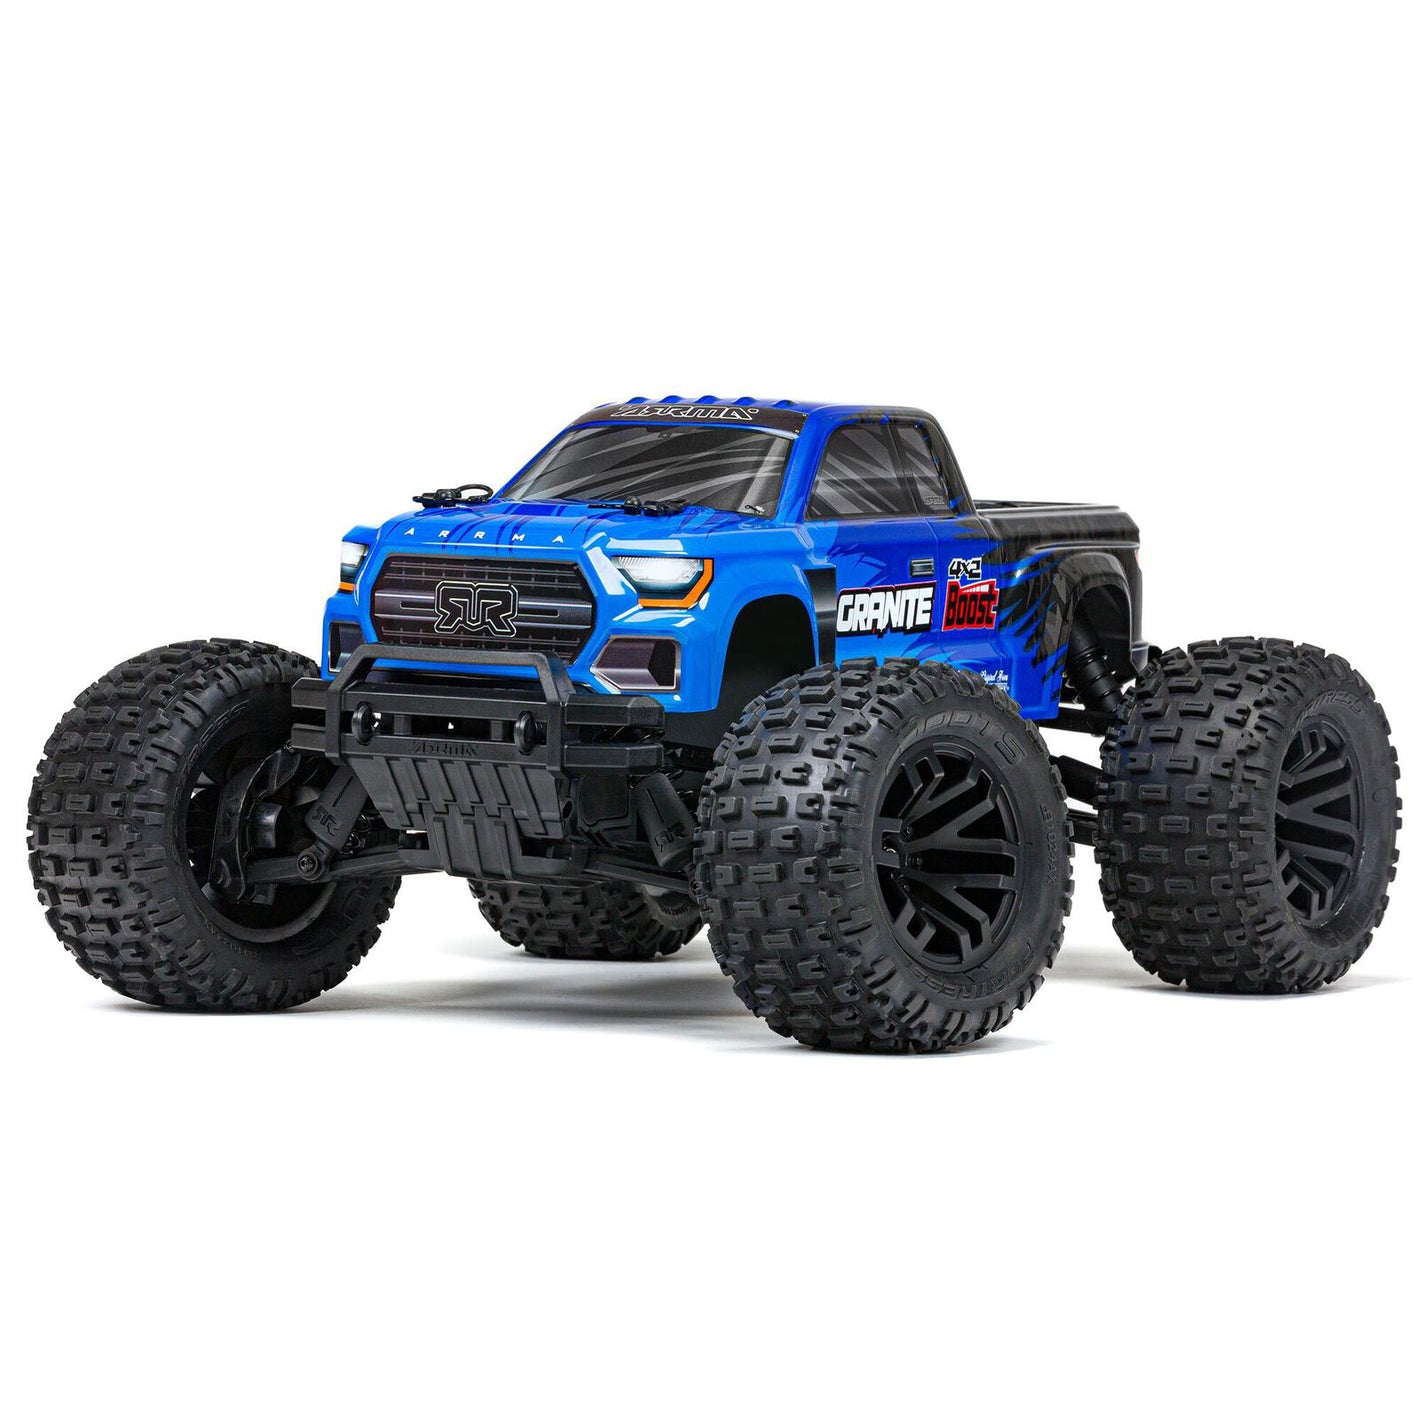 Granite 4X2 BOOST 1/10 Electric RTR Monster Truck (Blue)